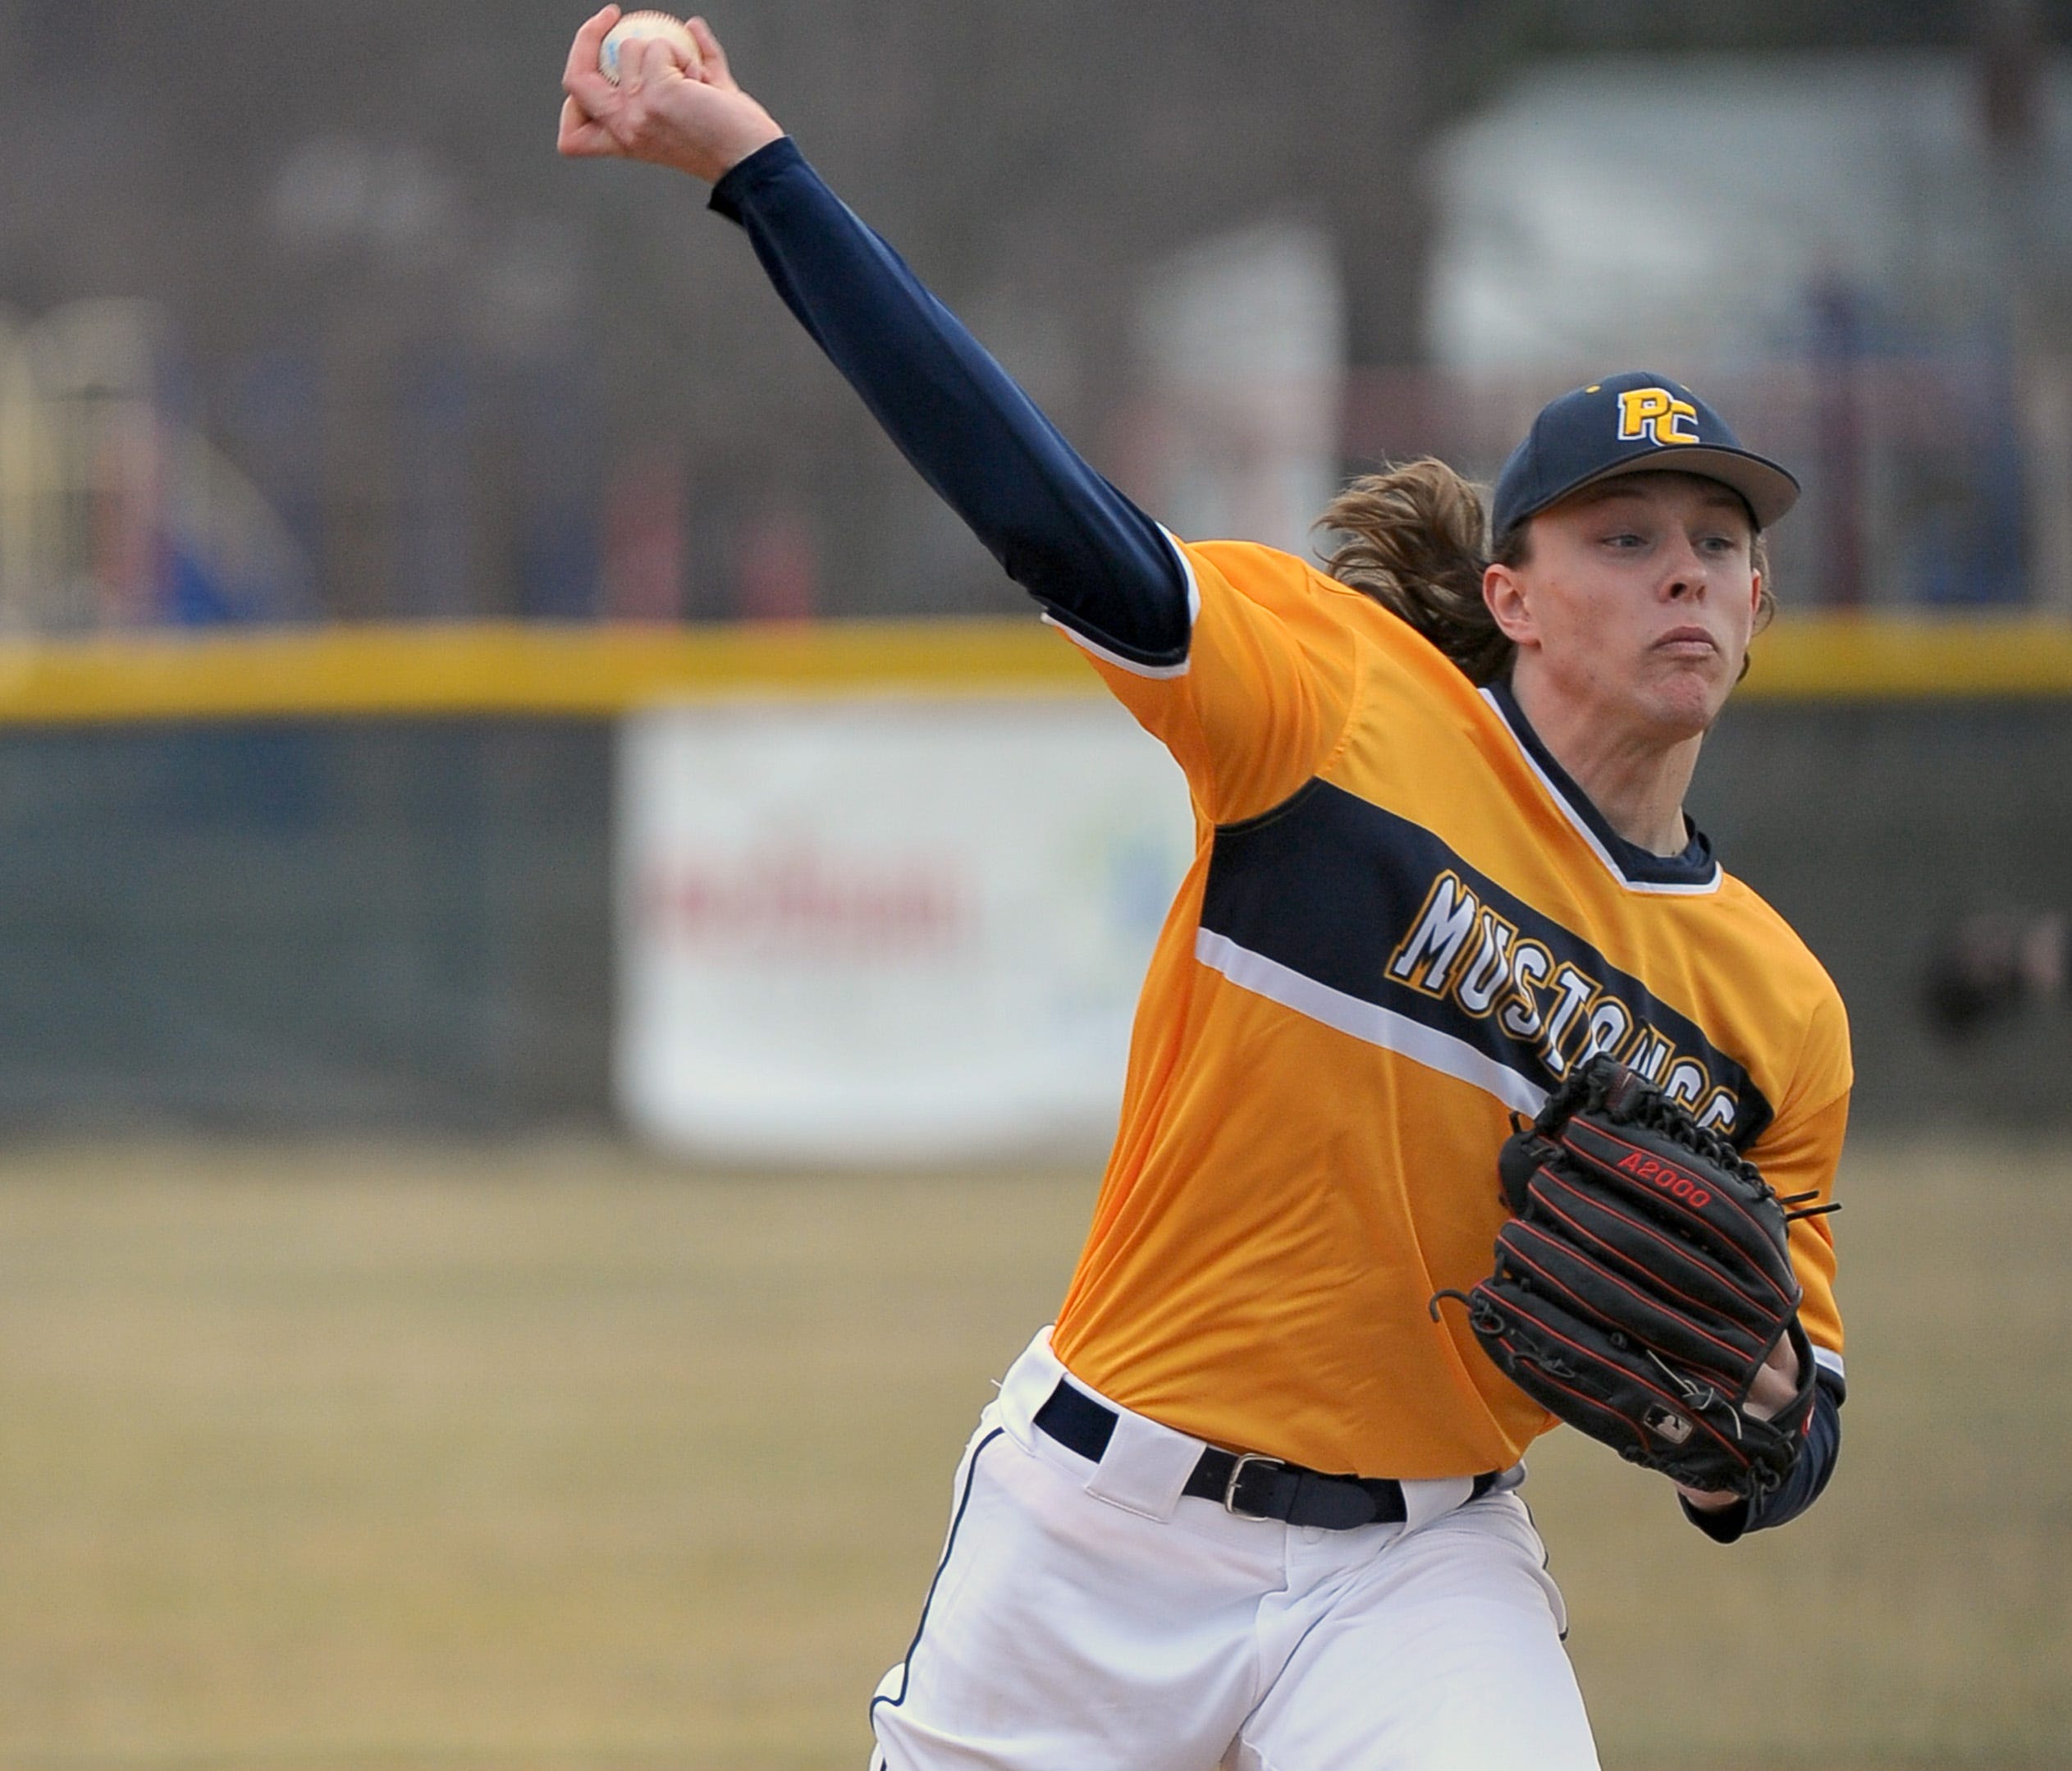 Portage Central freshman Luke Leto fires in a pitch during the Mustangs' home opener against Mattawan.  Leto has been ranked in the top five nationally for Class of 2021.